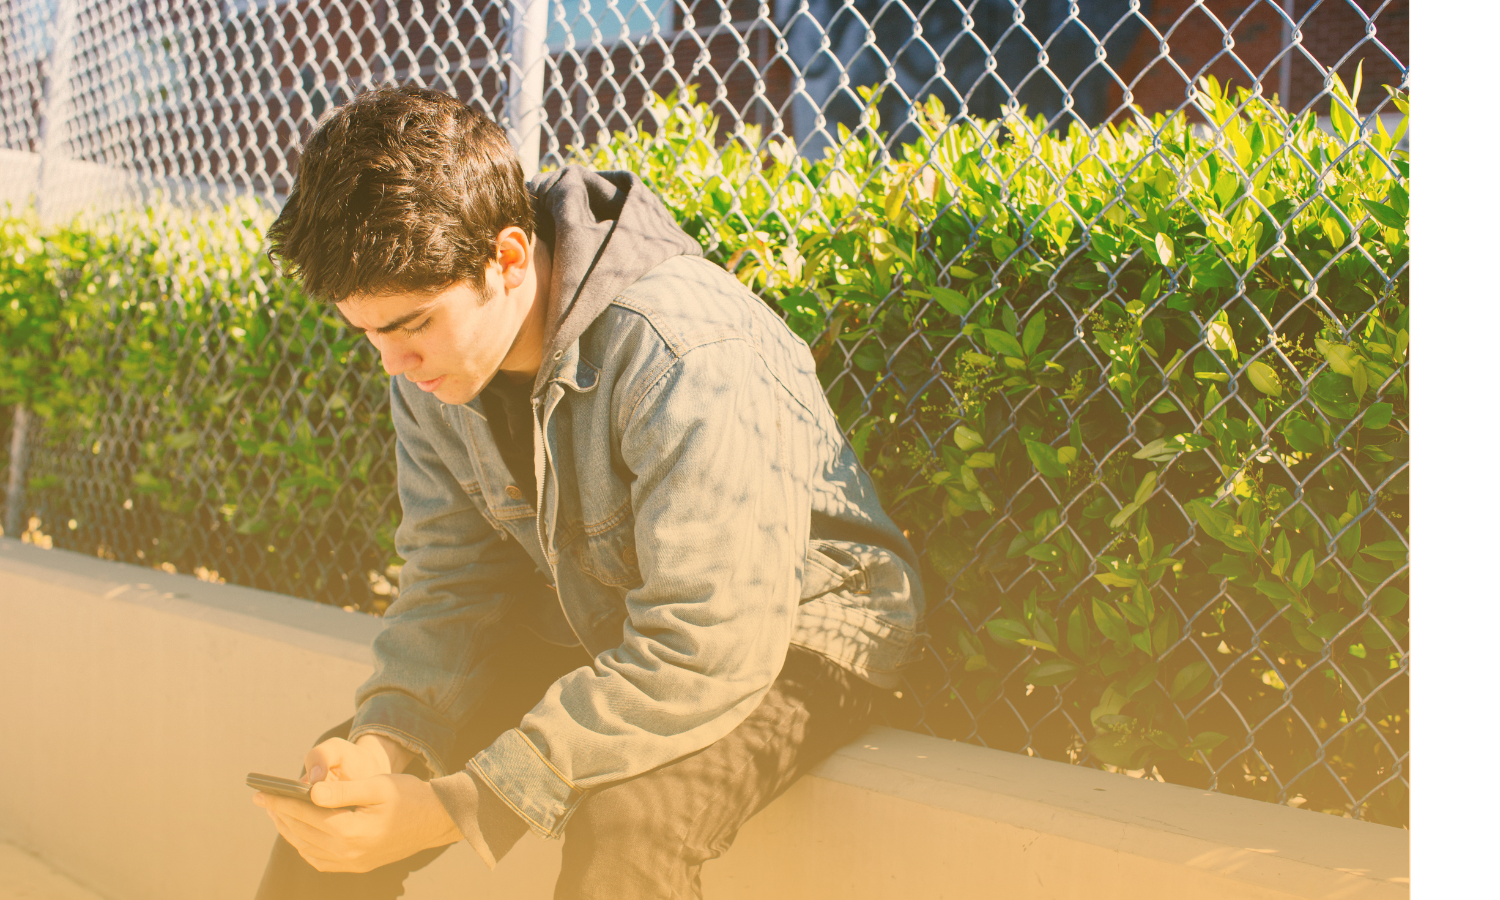 Teen boy sitting by fence outside looking at cell phone